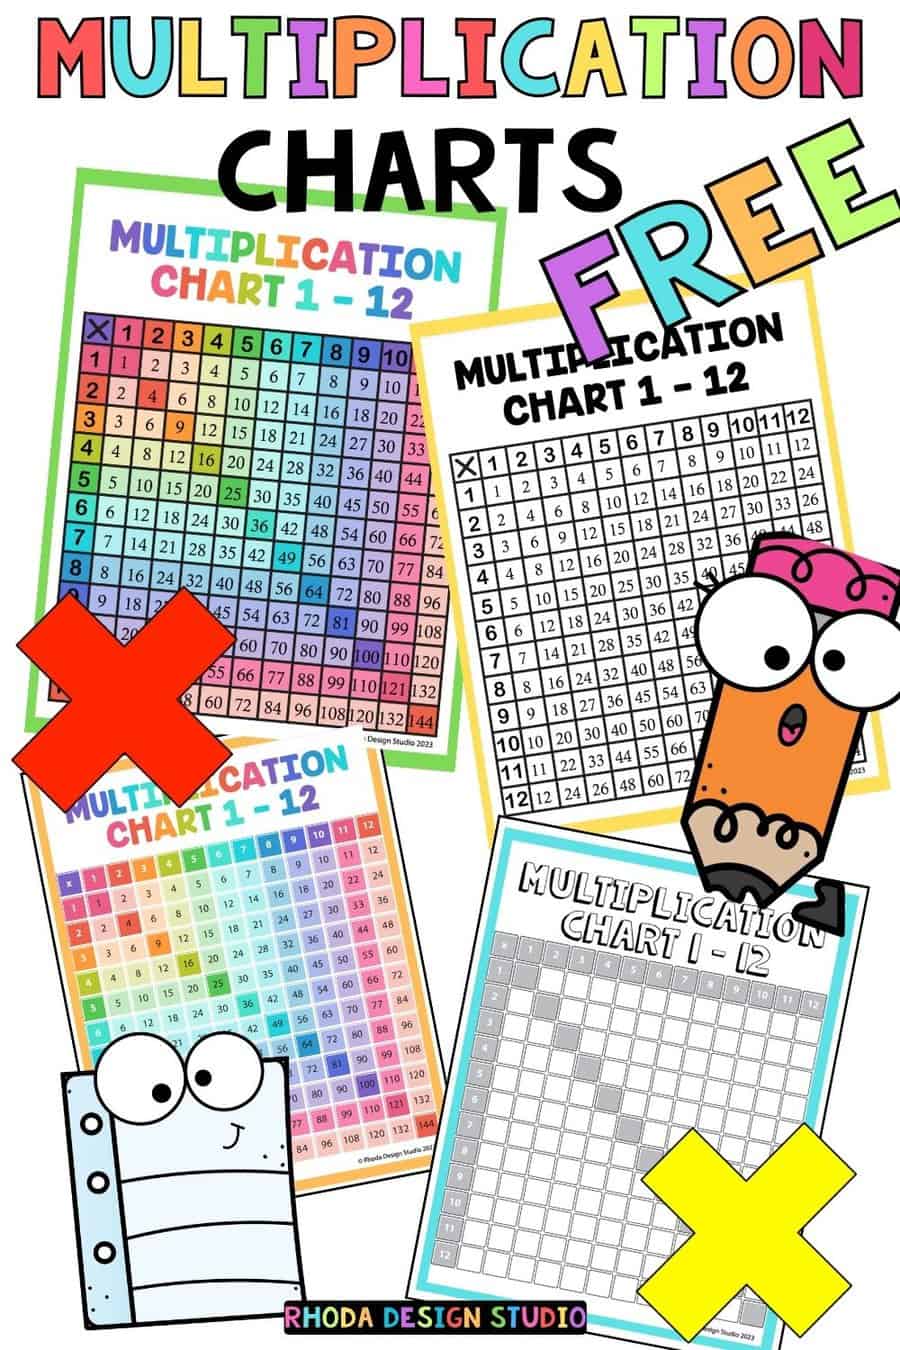 Free Printable Multiplication Charts: Master the Times Table for Free